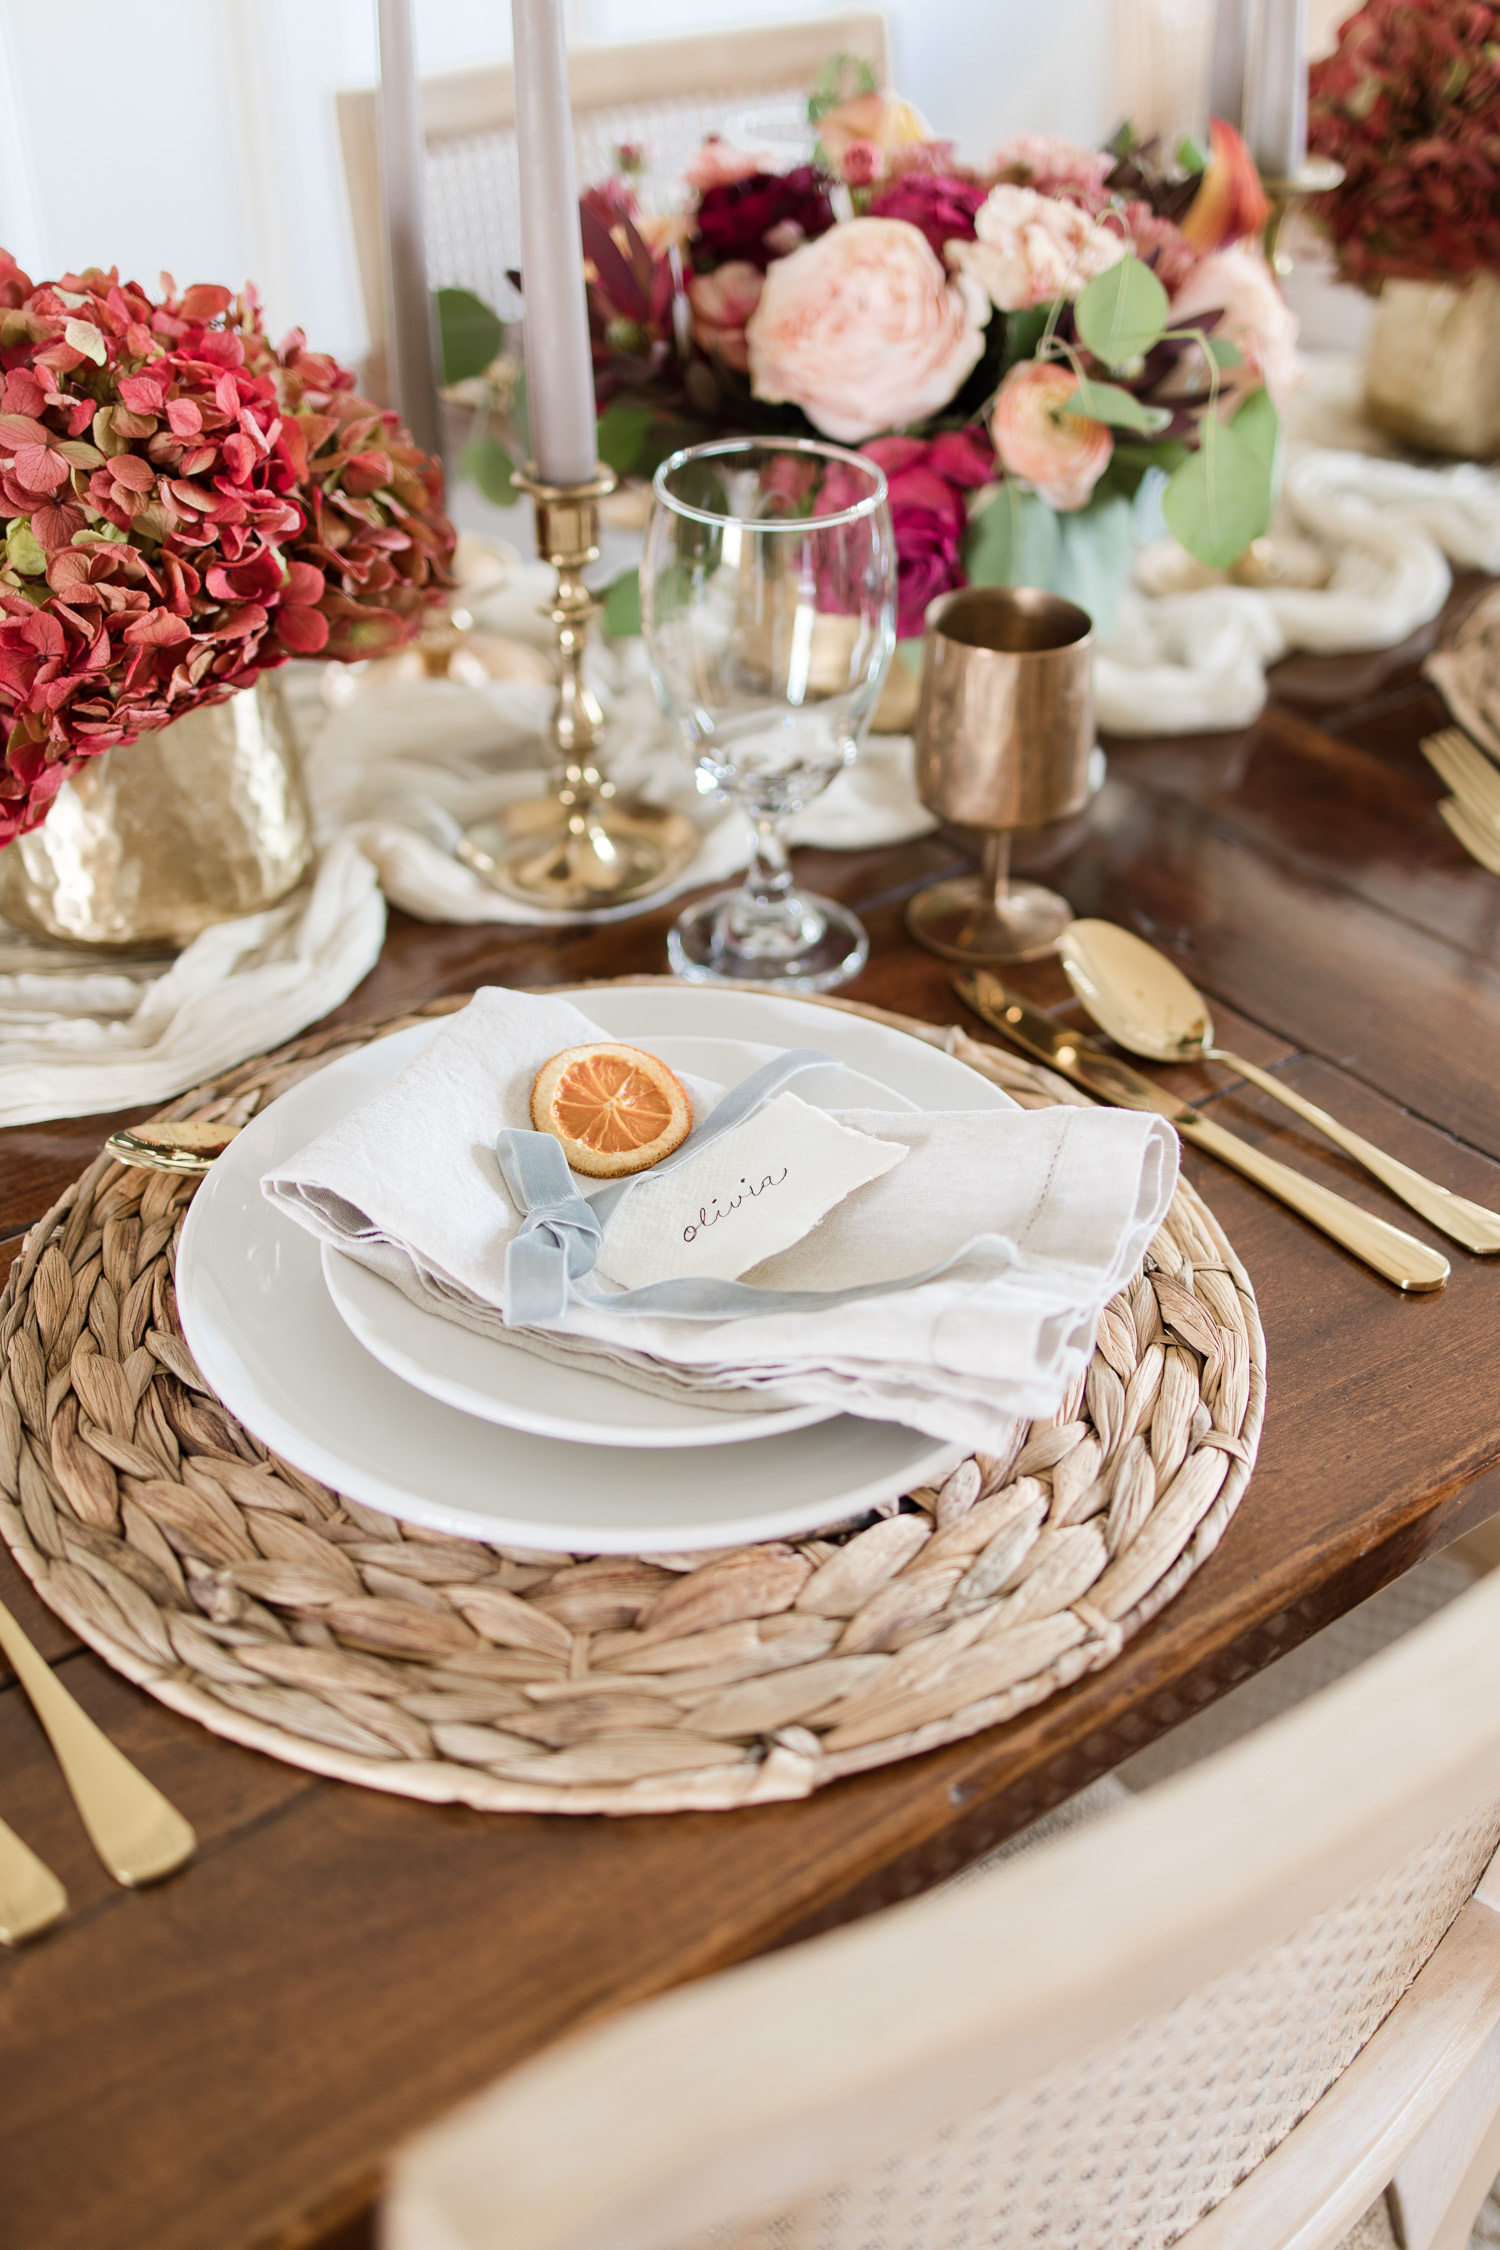 place cards at table setting at dining table